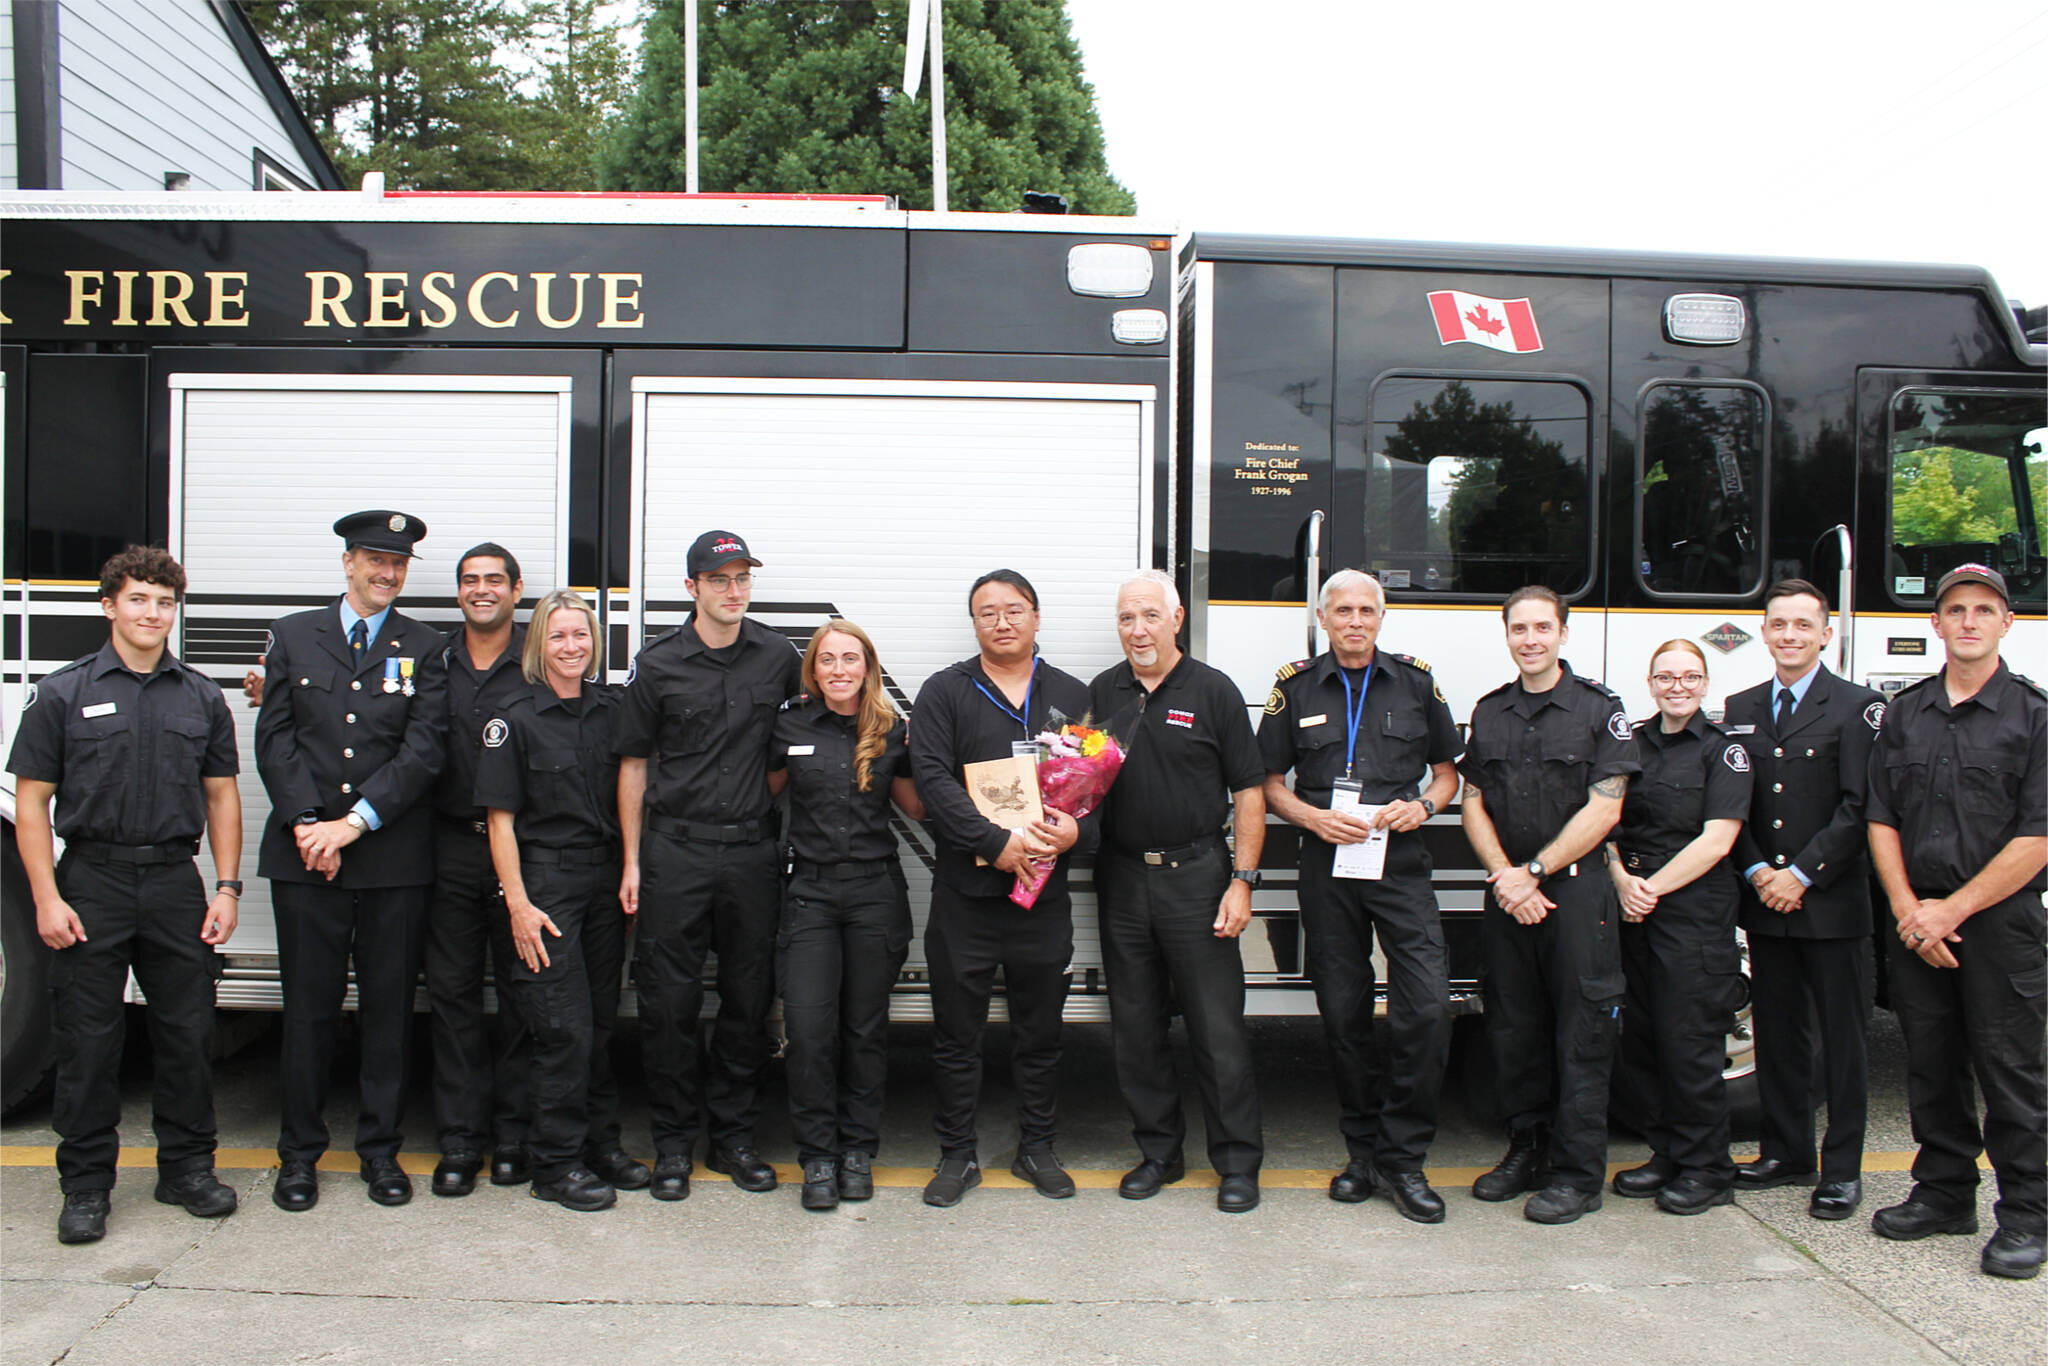 Junyi Liu, 41, saved an elderly woman from the flames during the Comox Esso fire in May 2023. A few months later, he was awarded the Courage & Bravery Local Hero Award. Liu (middle) poses surrounded by firefighters of the Comox Fire Rescue during the award ceremony on Sept. 6. (Connor McDowell / Comox Valley Record)